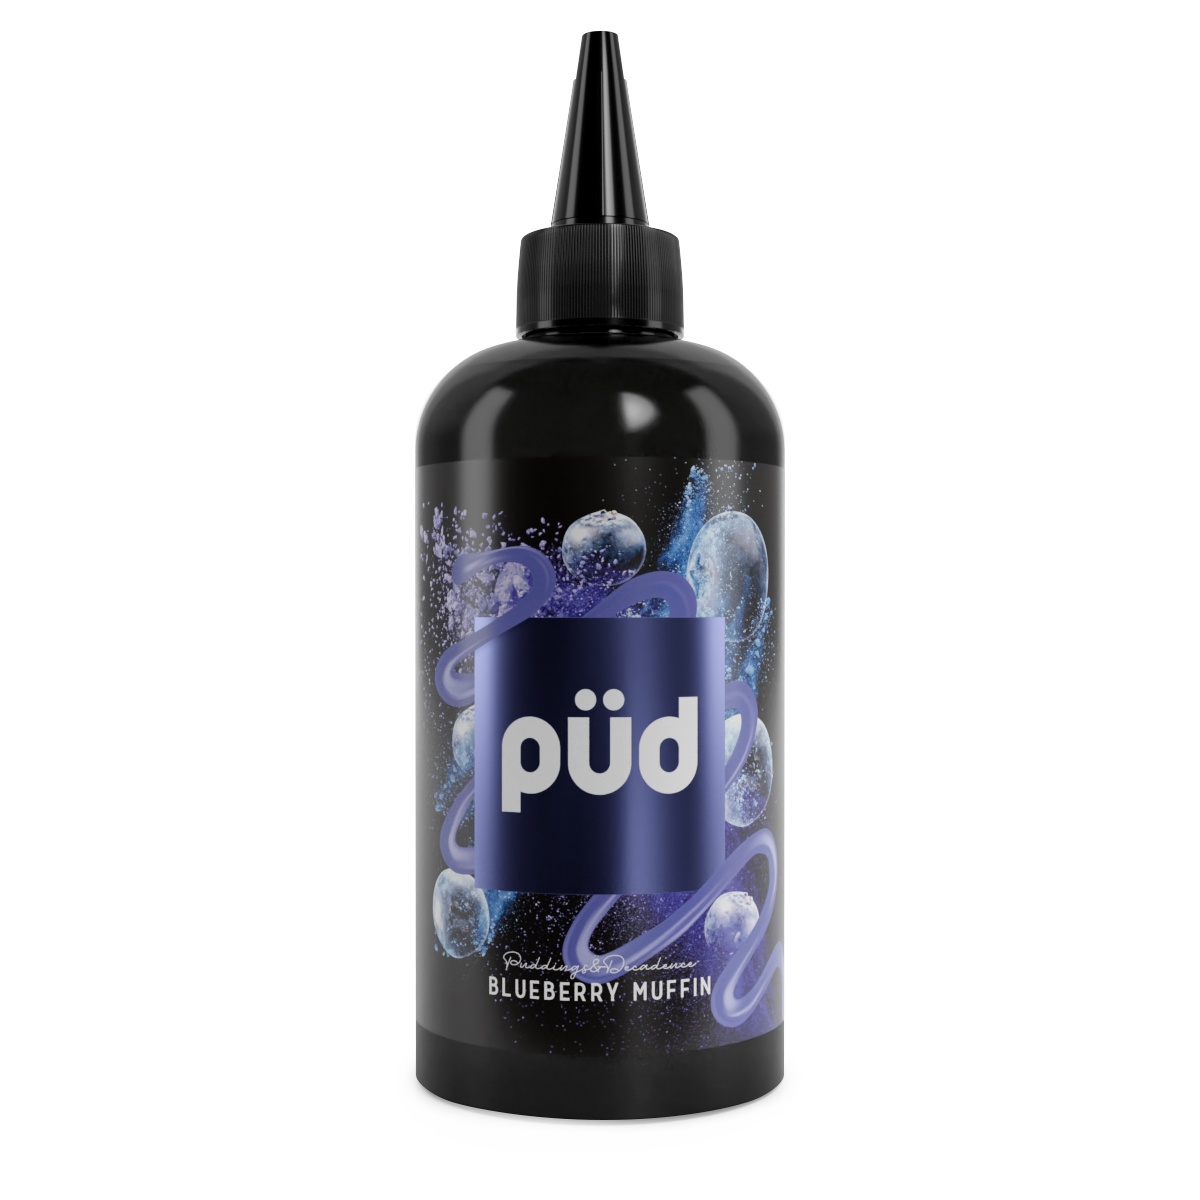 pud-200ml-blueberry-muffin